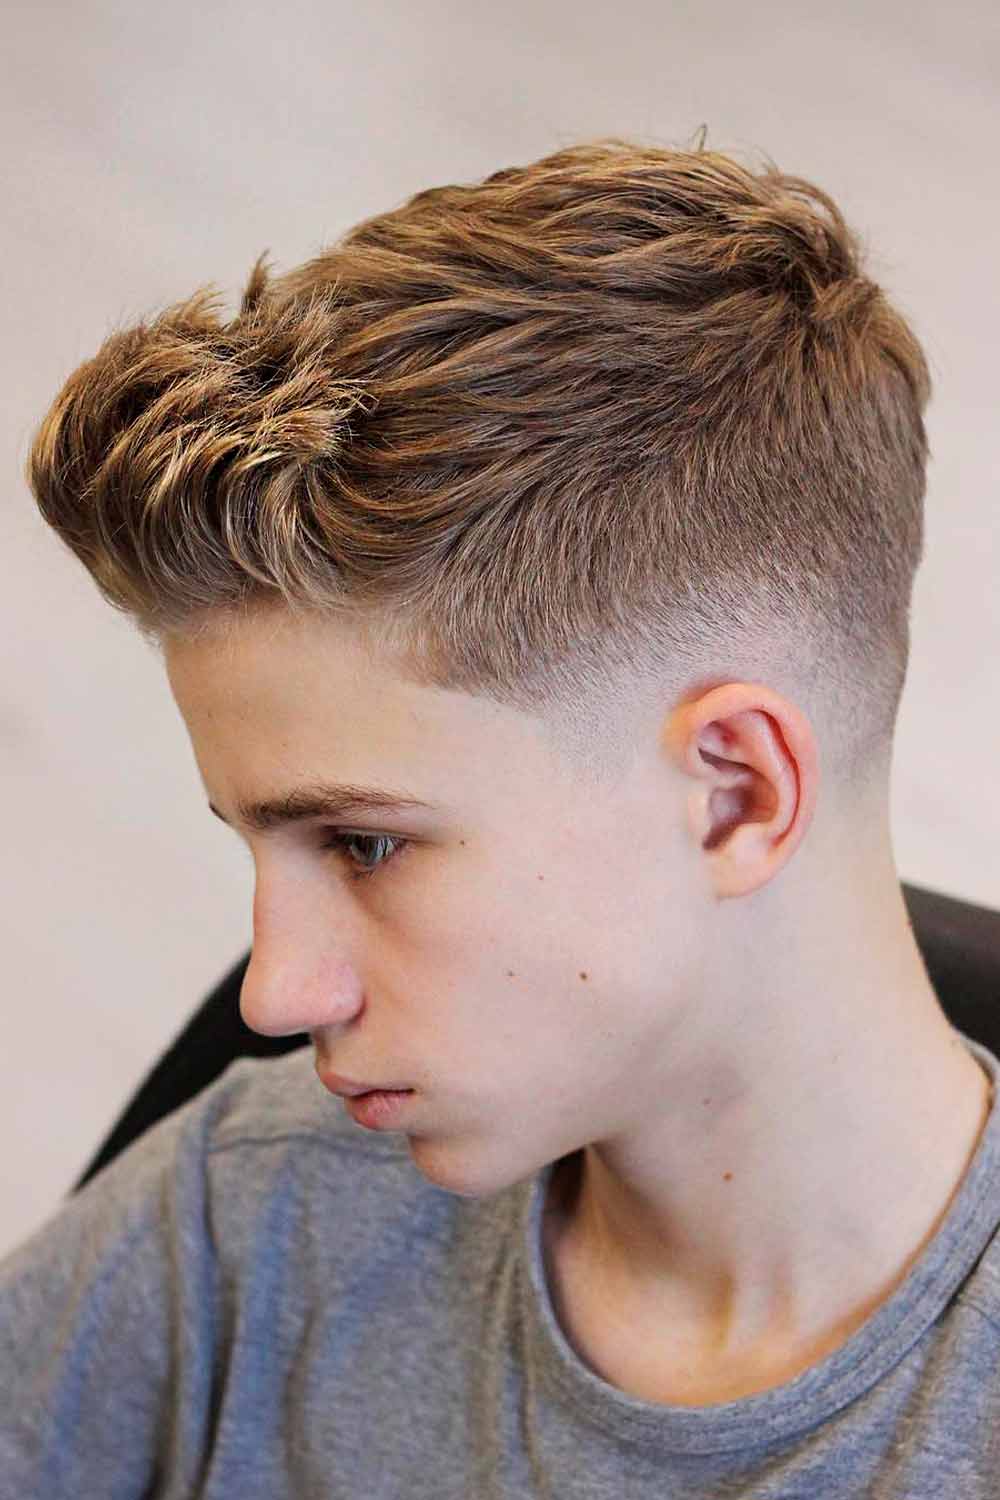 60 Best Mixed Boys Haircuts: 2023 Hairstyle Ideas for Biracial Boys